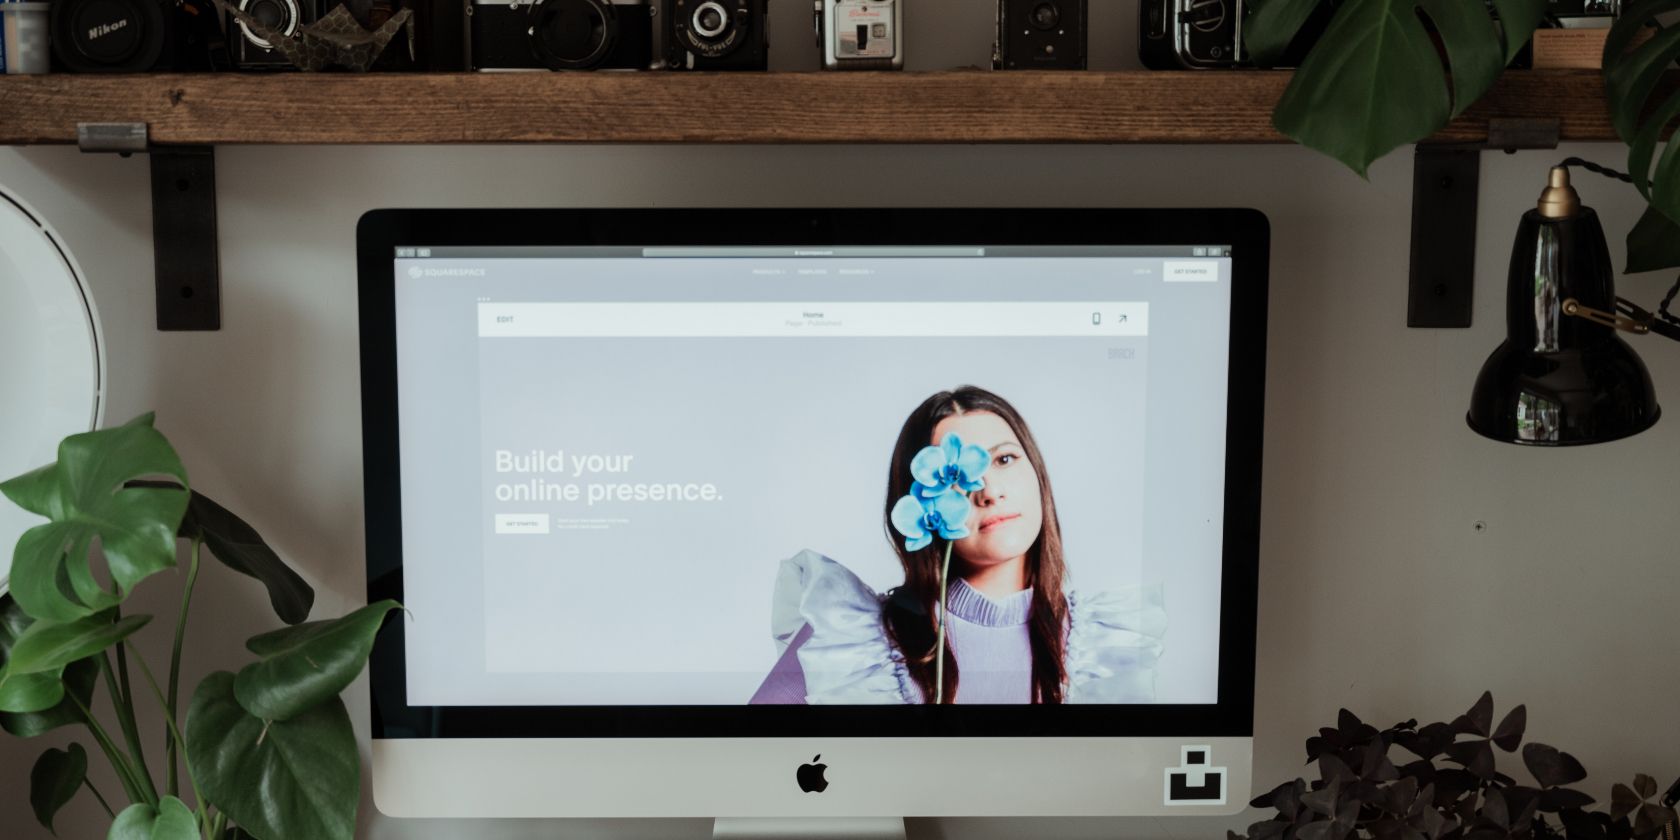 An iMac displaying the Squarespace website builder on screen